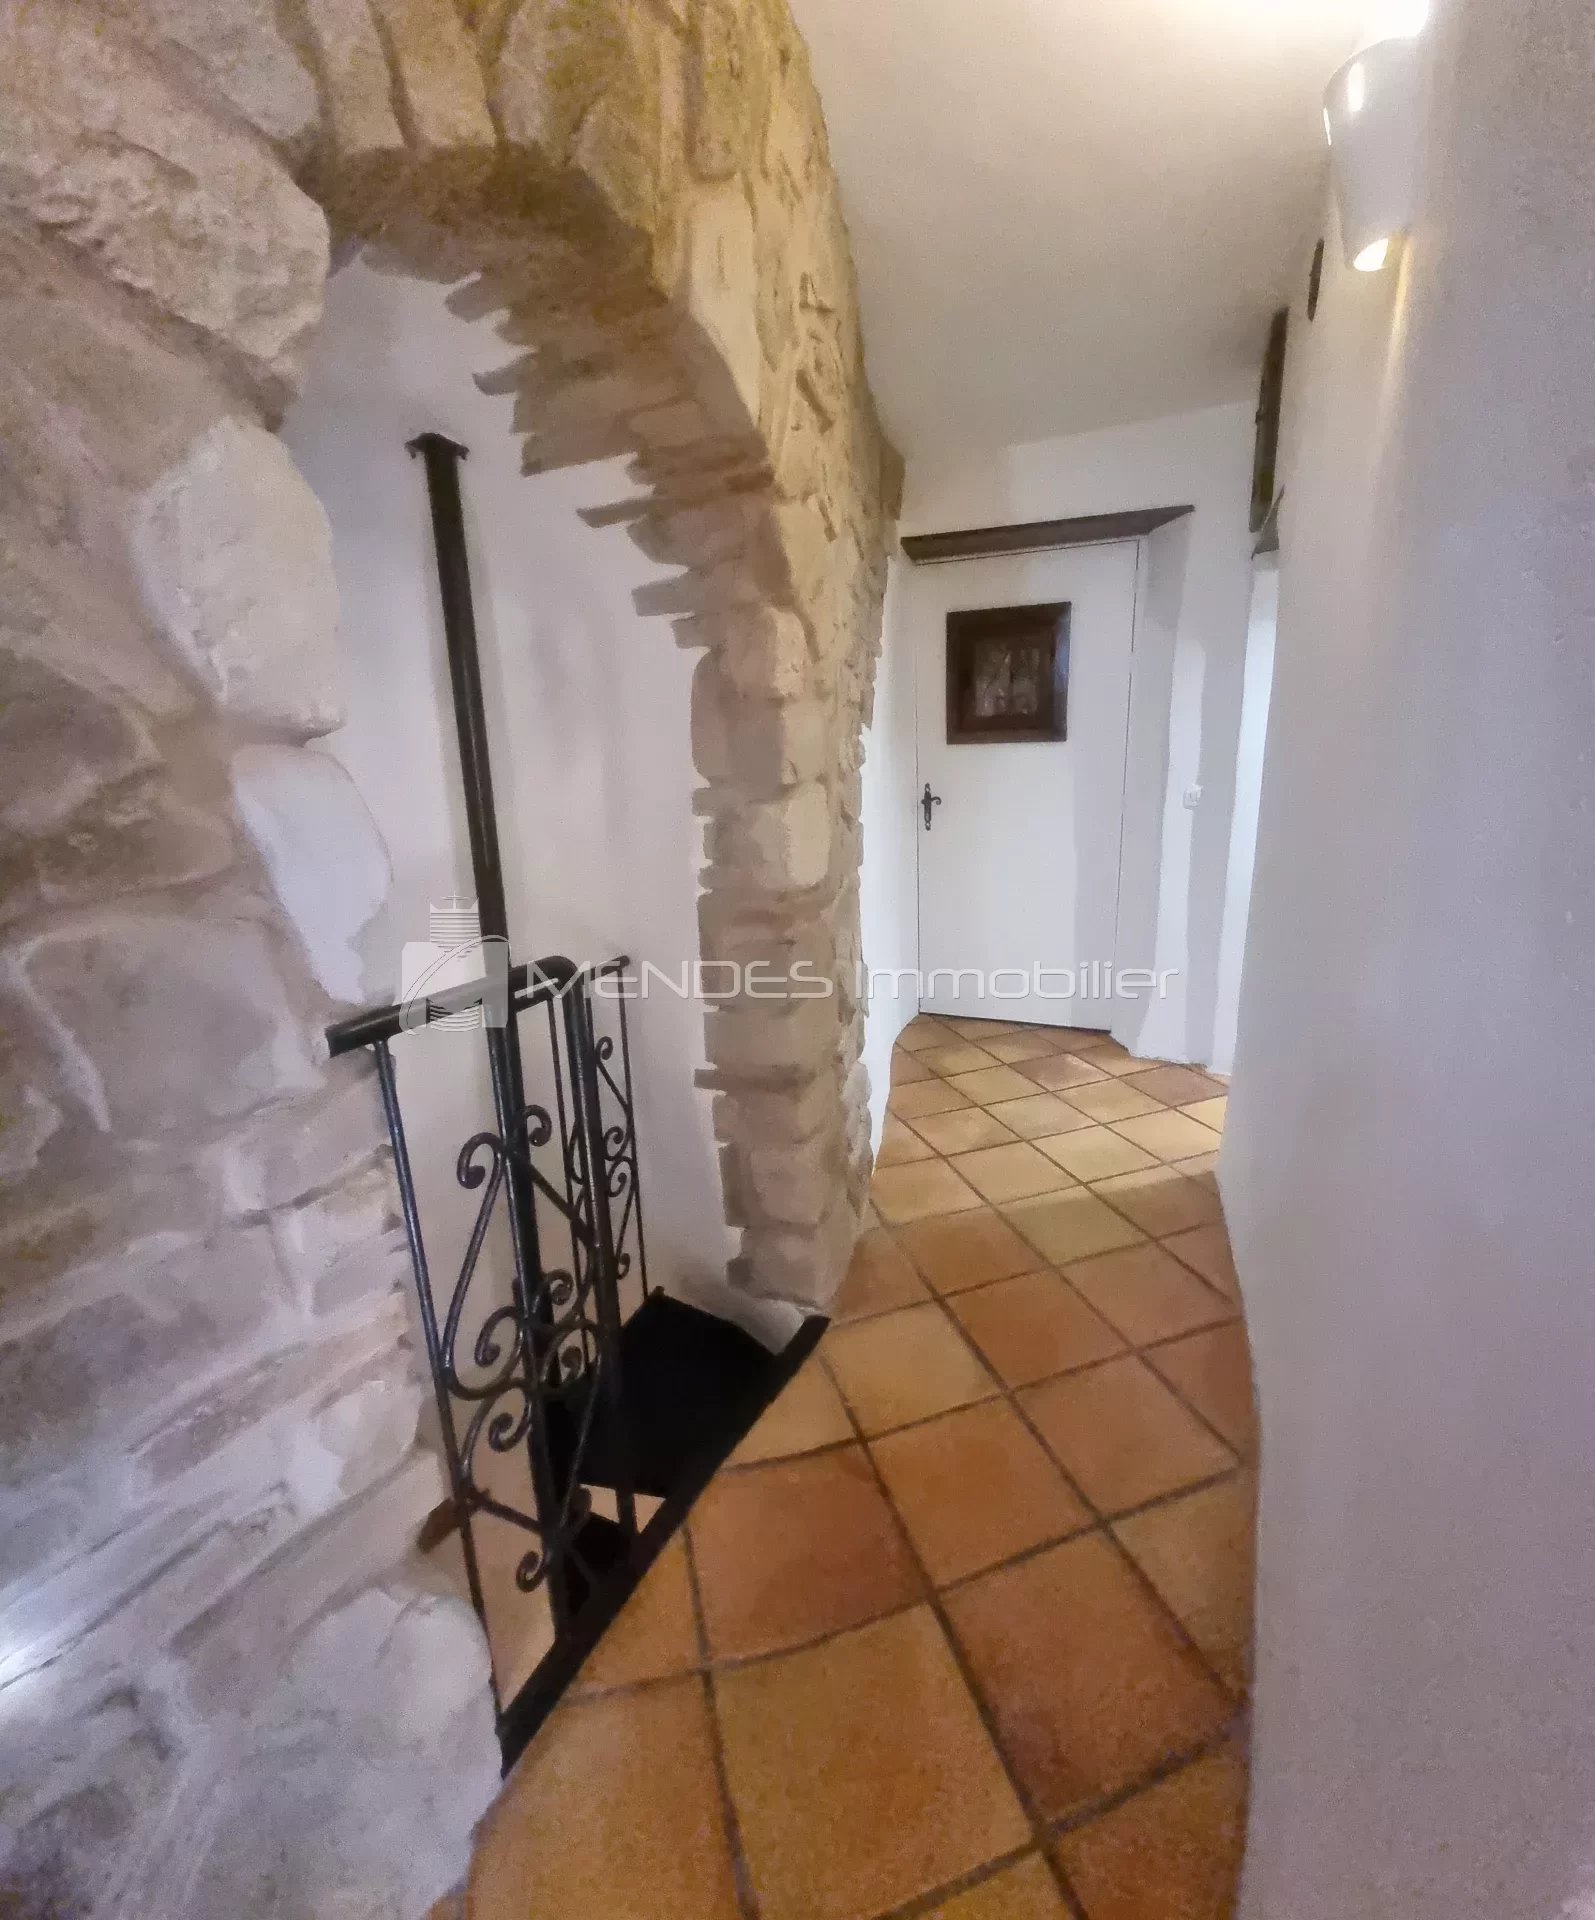 ATYPICAL HOUSE IN ROQUEBRUNE VILLAGE